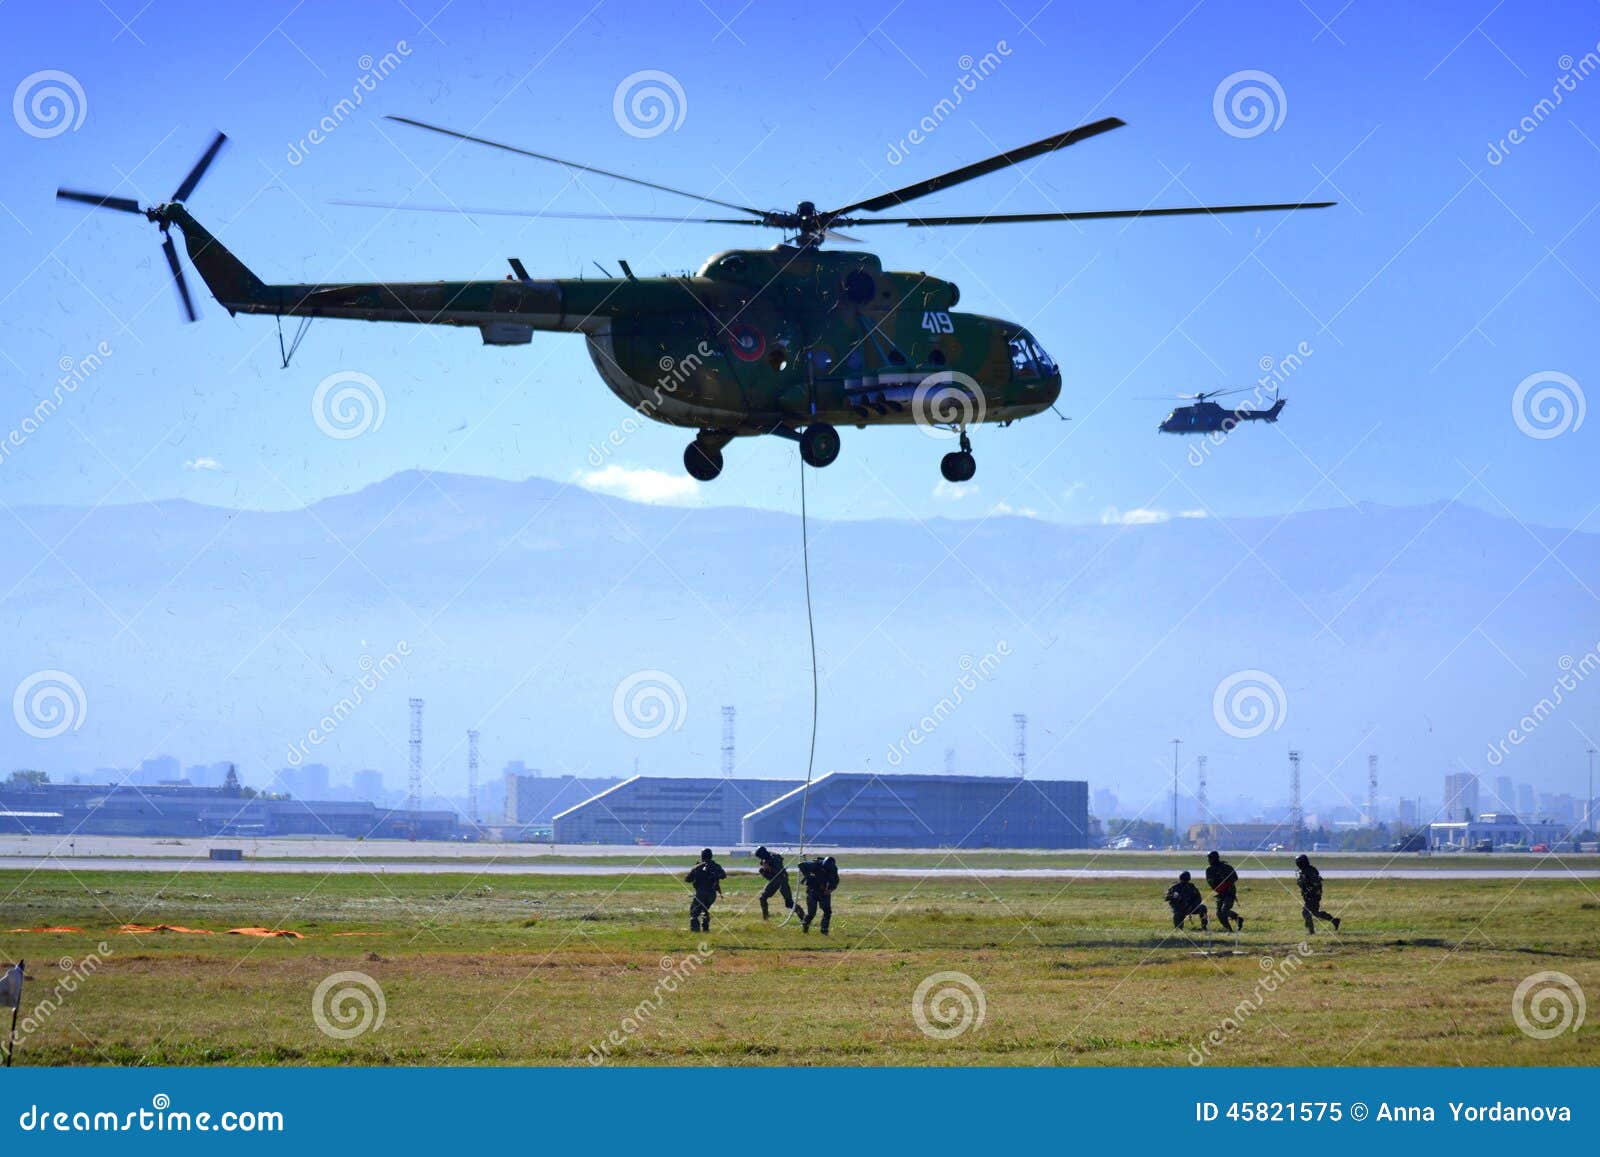 Helicopter Mi-17 Assault Air Cover Editorial Image - Image of people,  force: 45821575